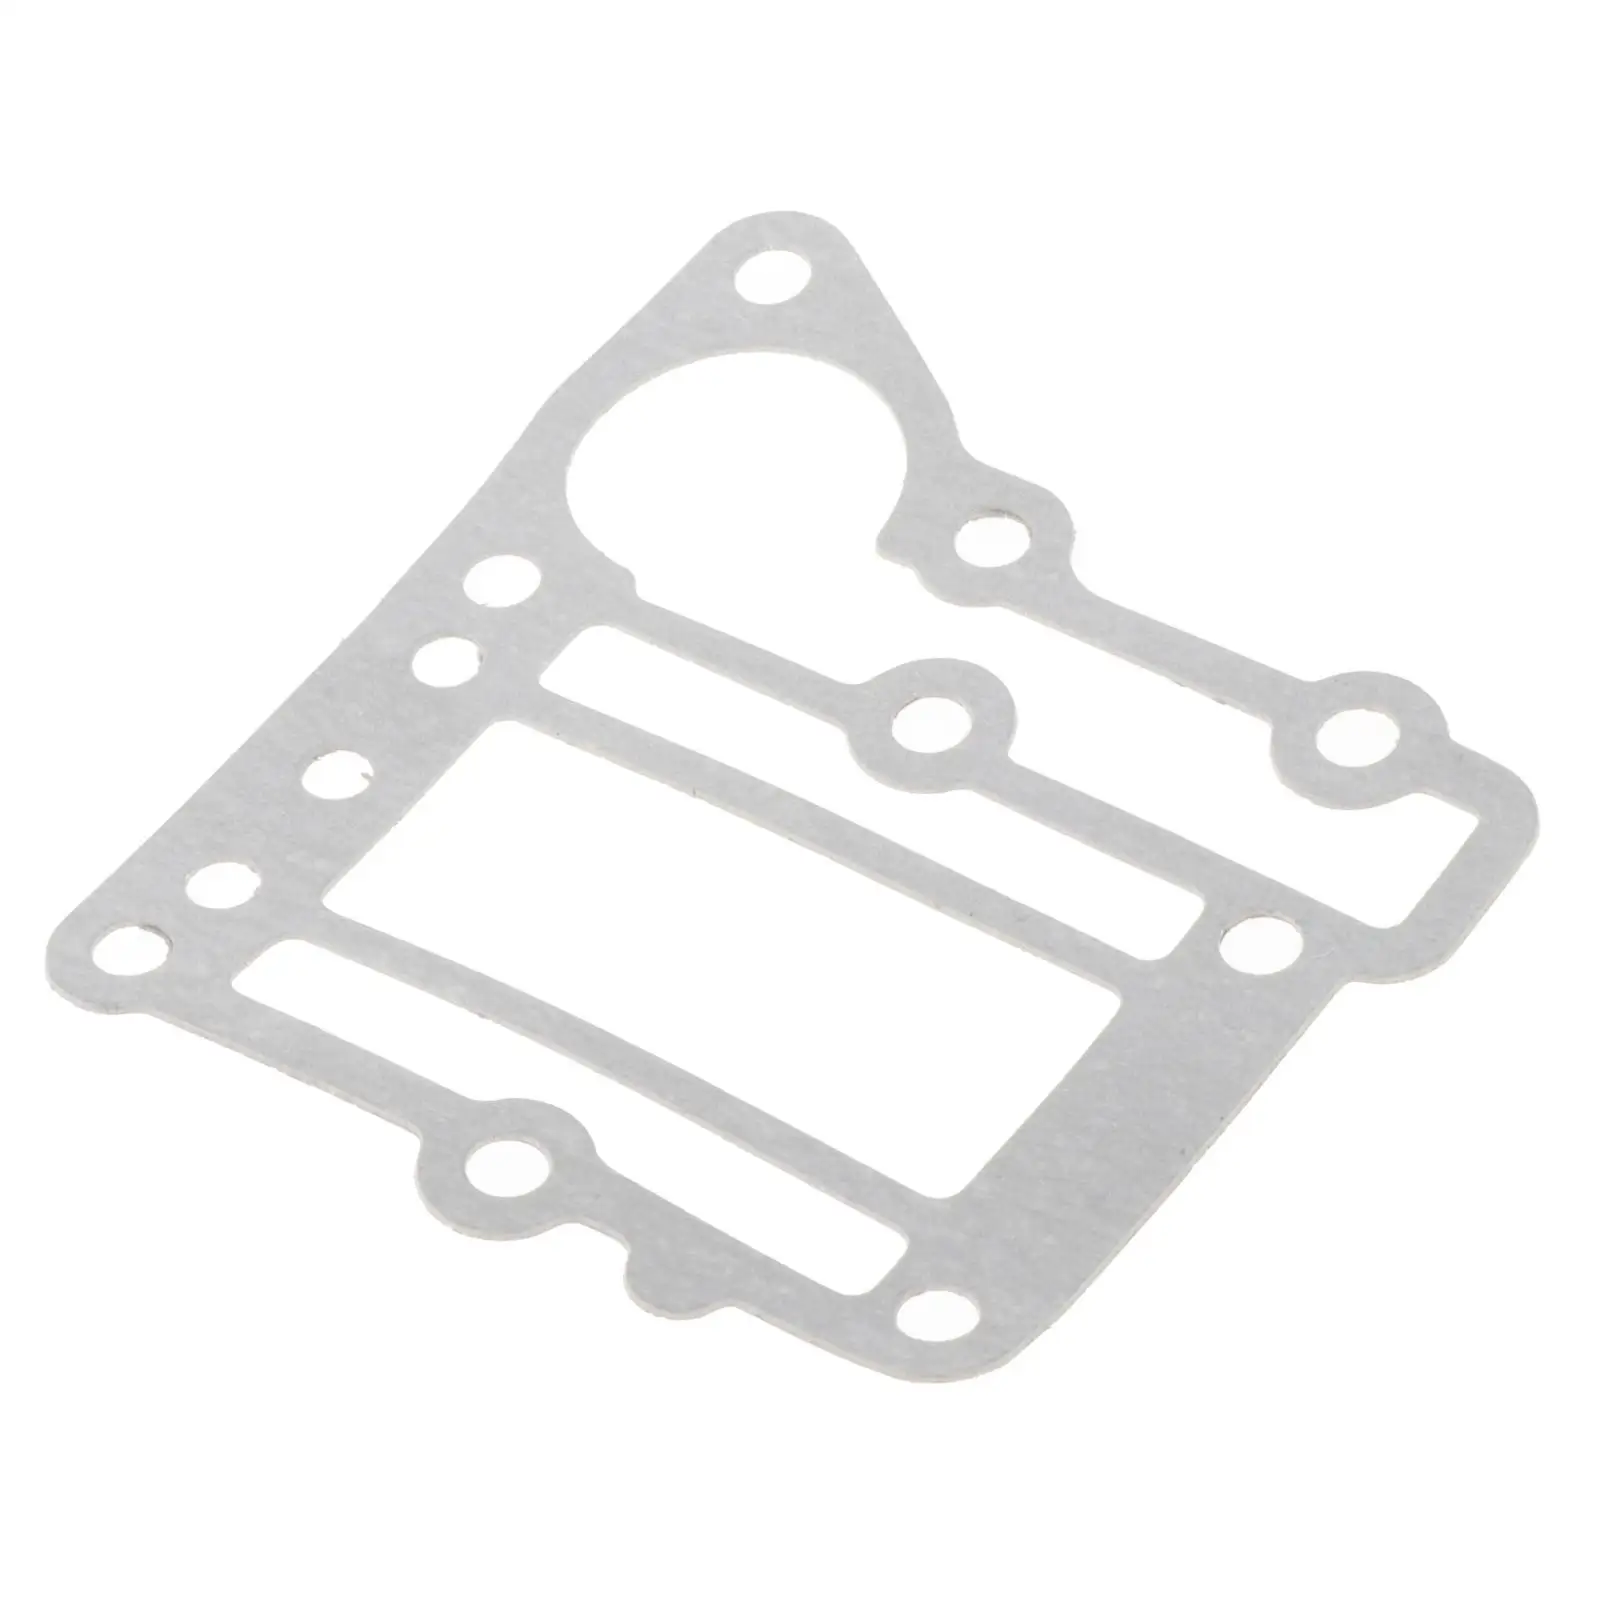 Gasket Outer Cover 6E3-41114-A1 for   Outboard 4B 5C 85 Motor